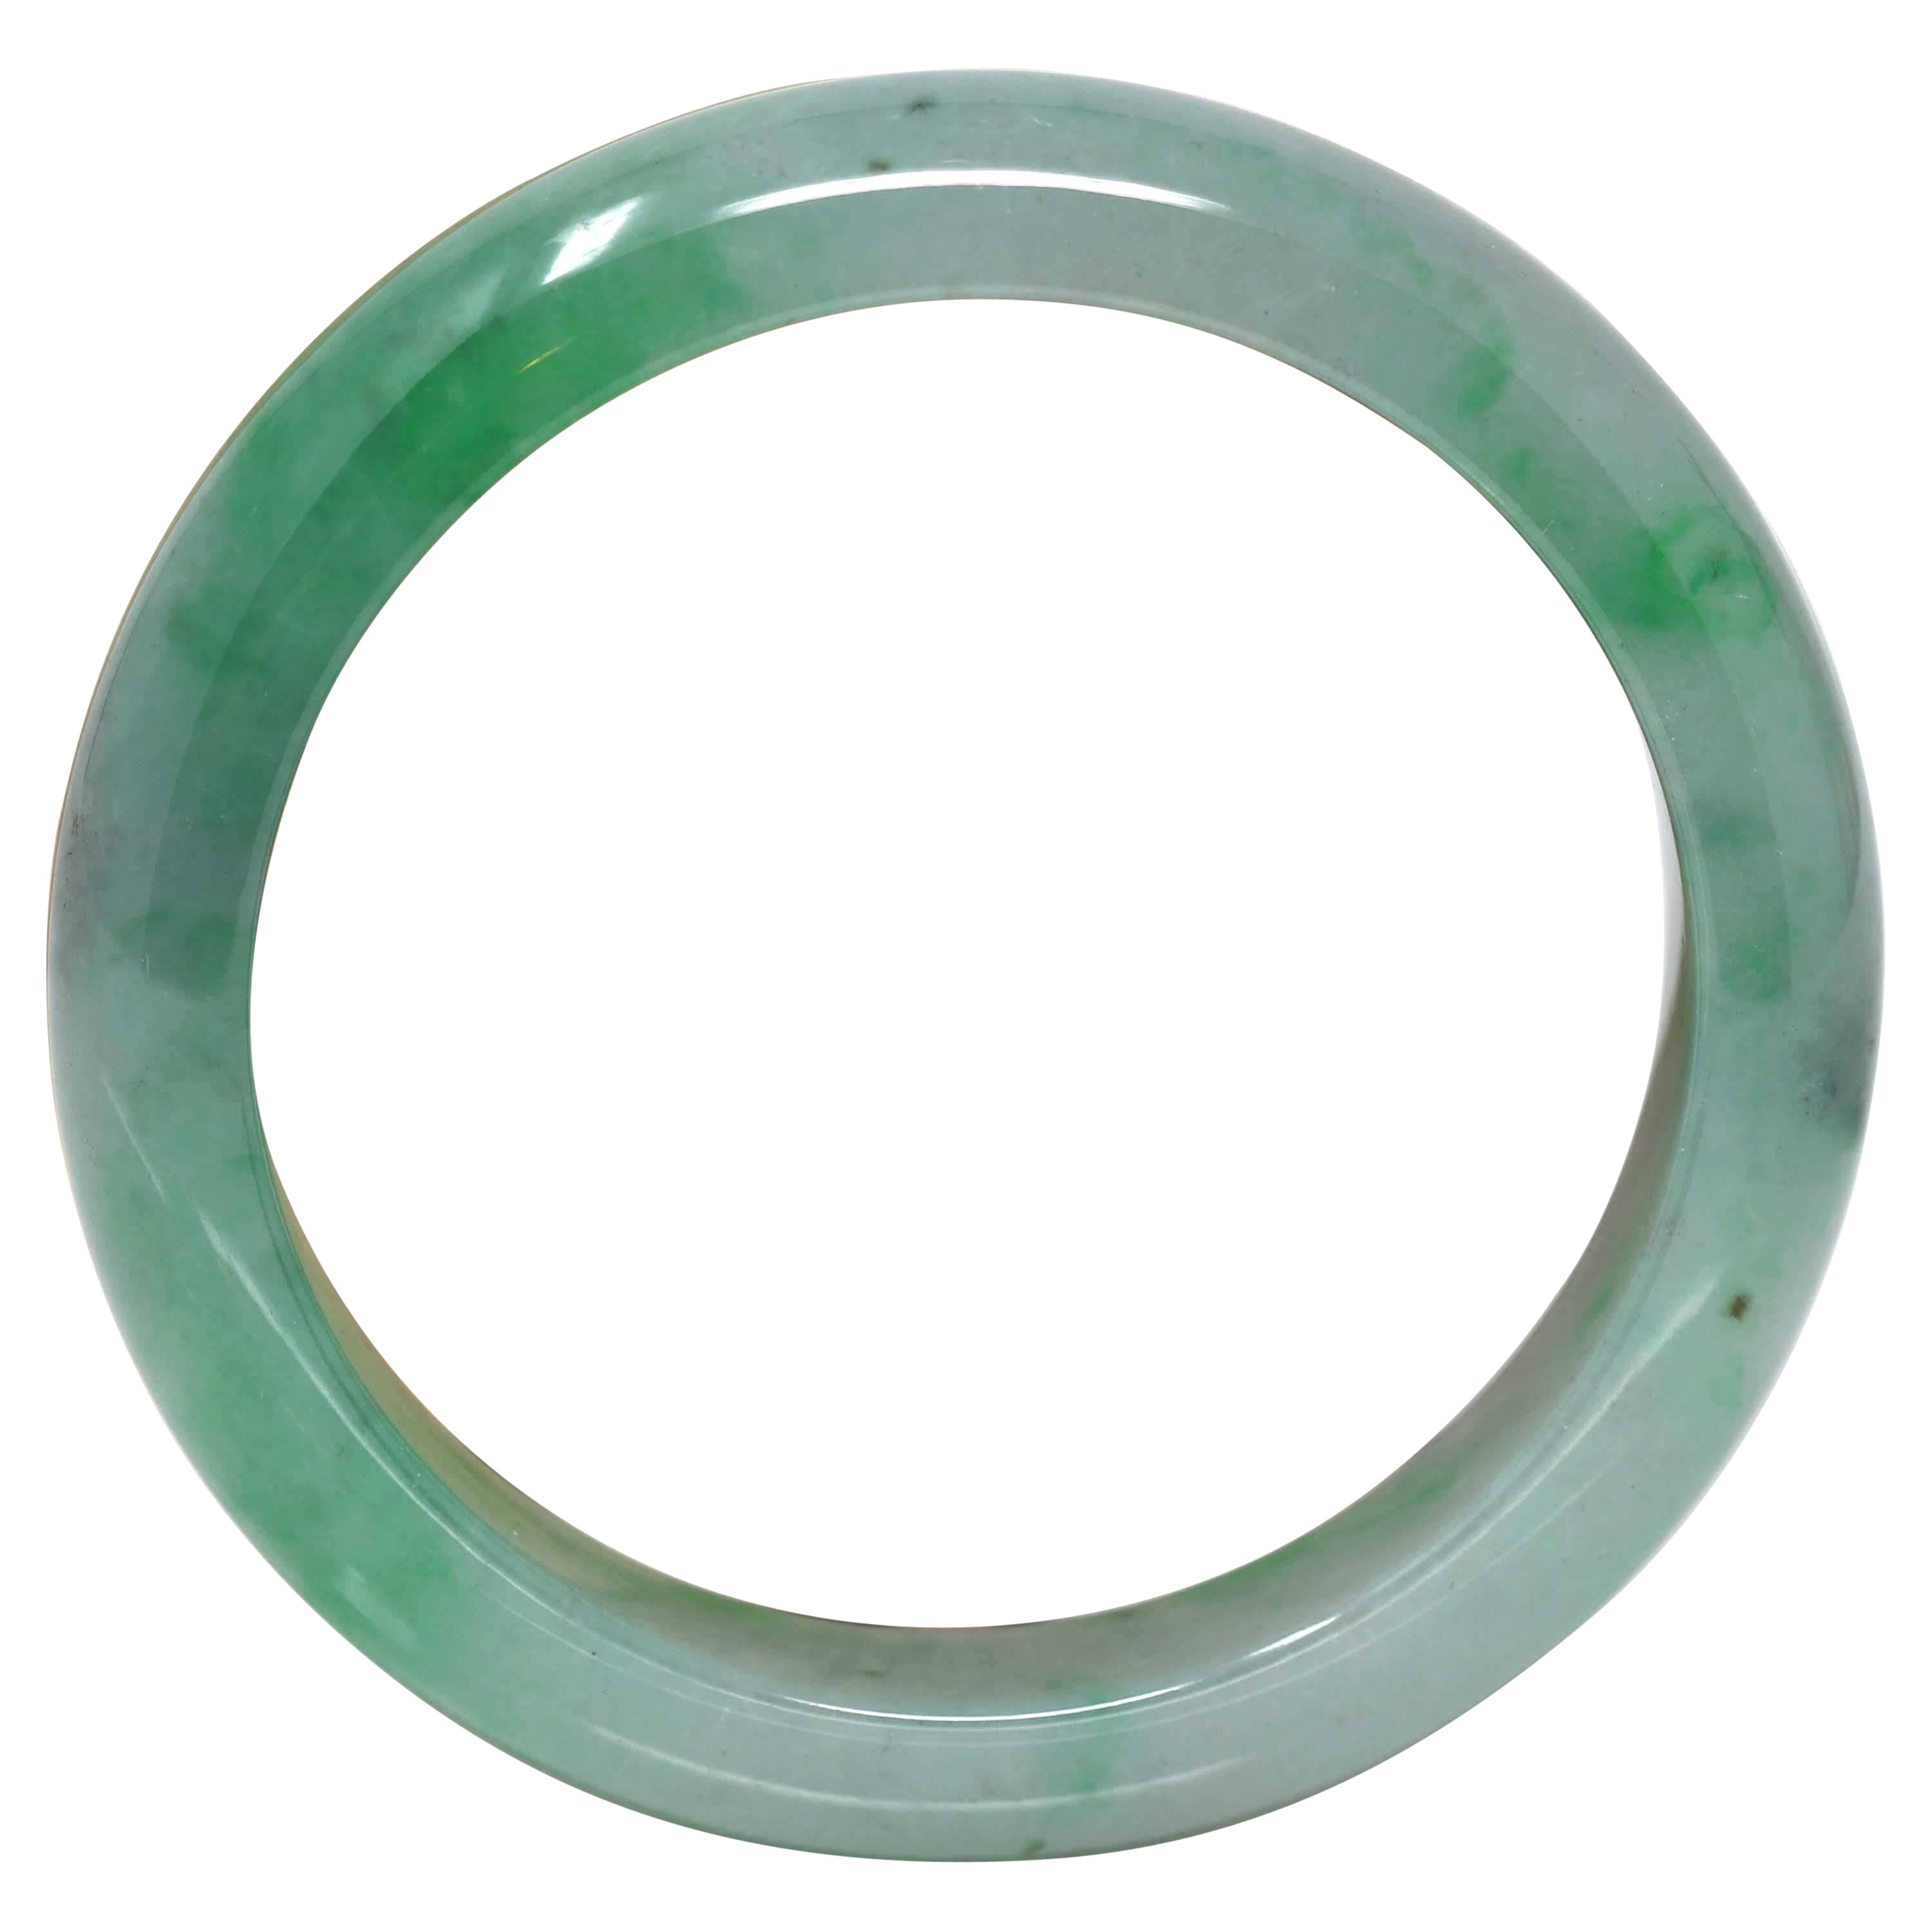 * DETAILS--- Genuine Burmese Jadeite Jade Bangle Bracelet. This bangle is made with high-quality genuine Burmese Jadeite jade, The jade texture is so smooth with lots of vibrant green colors inside. It looks perfect with green parts and transparent